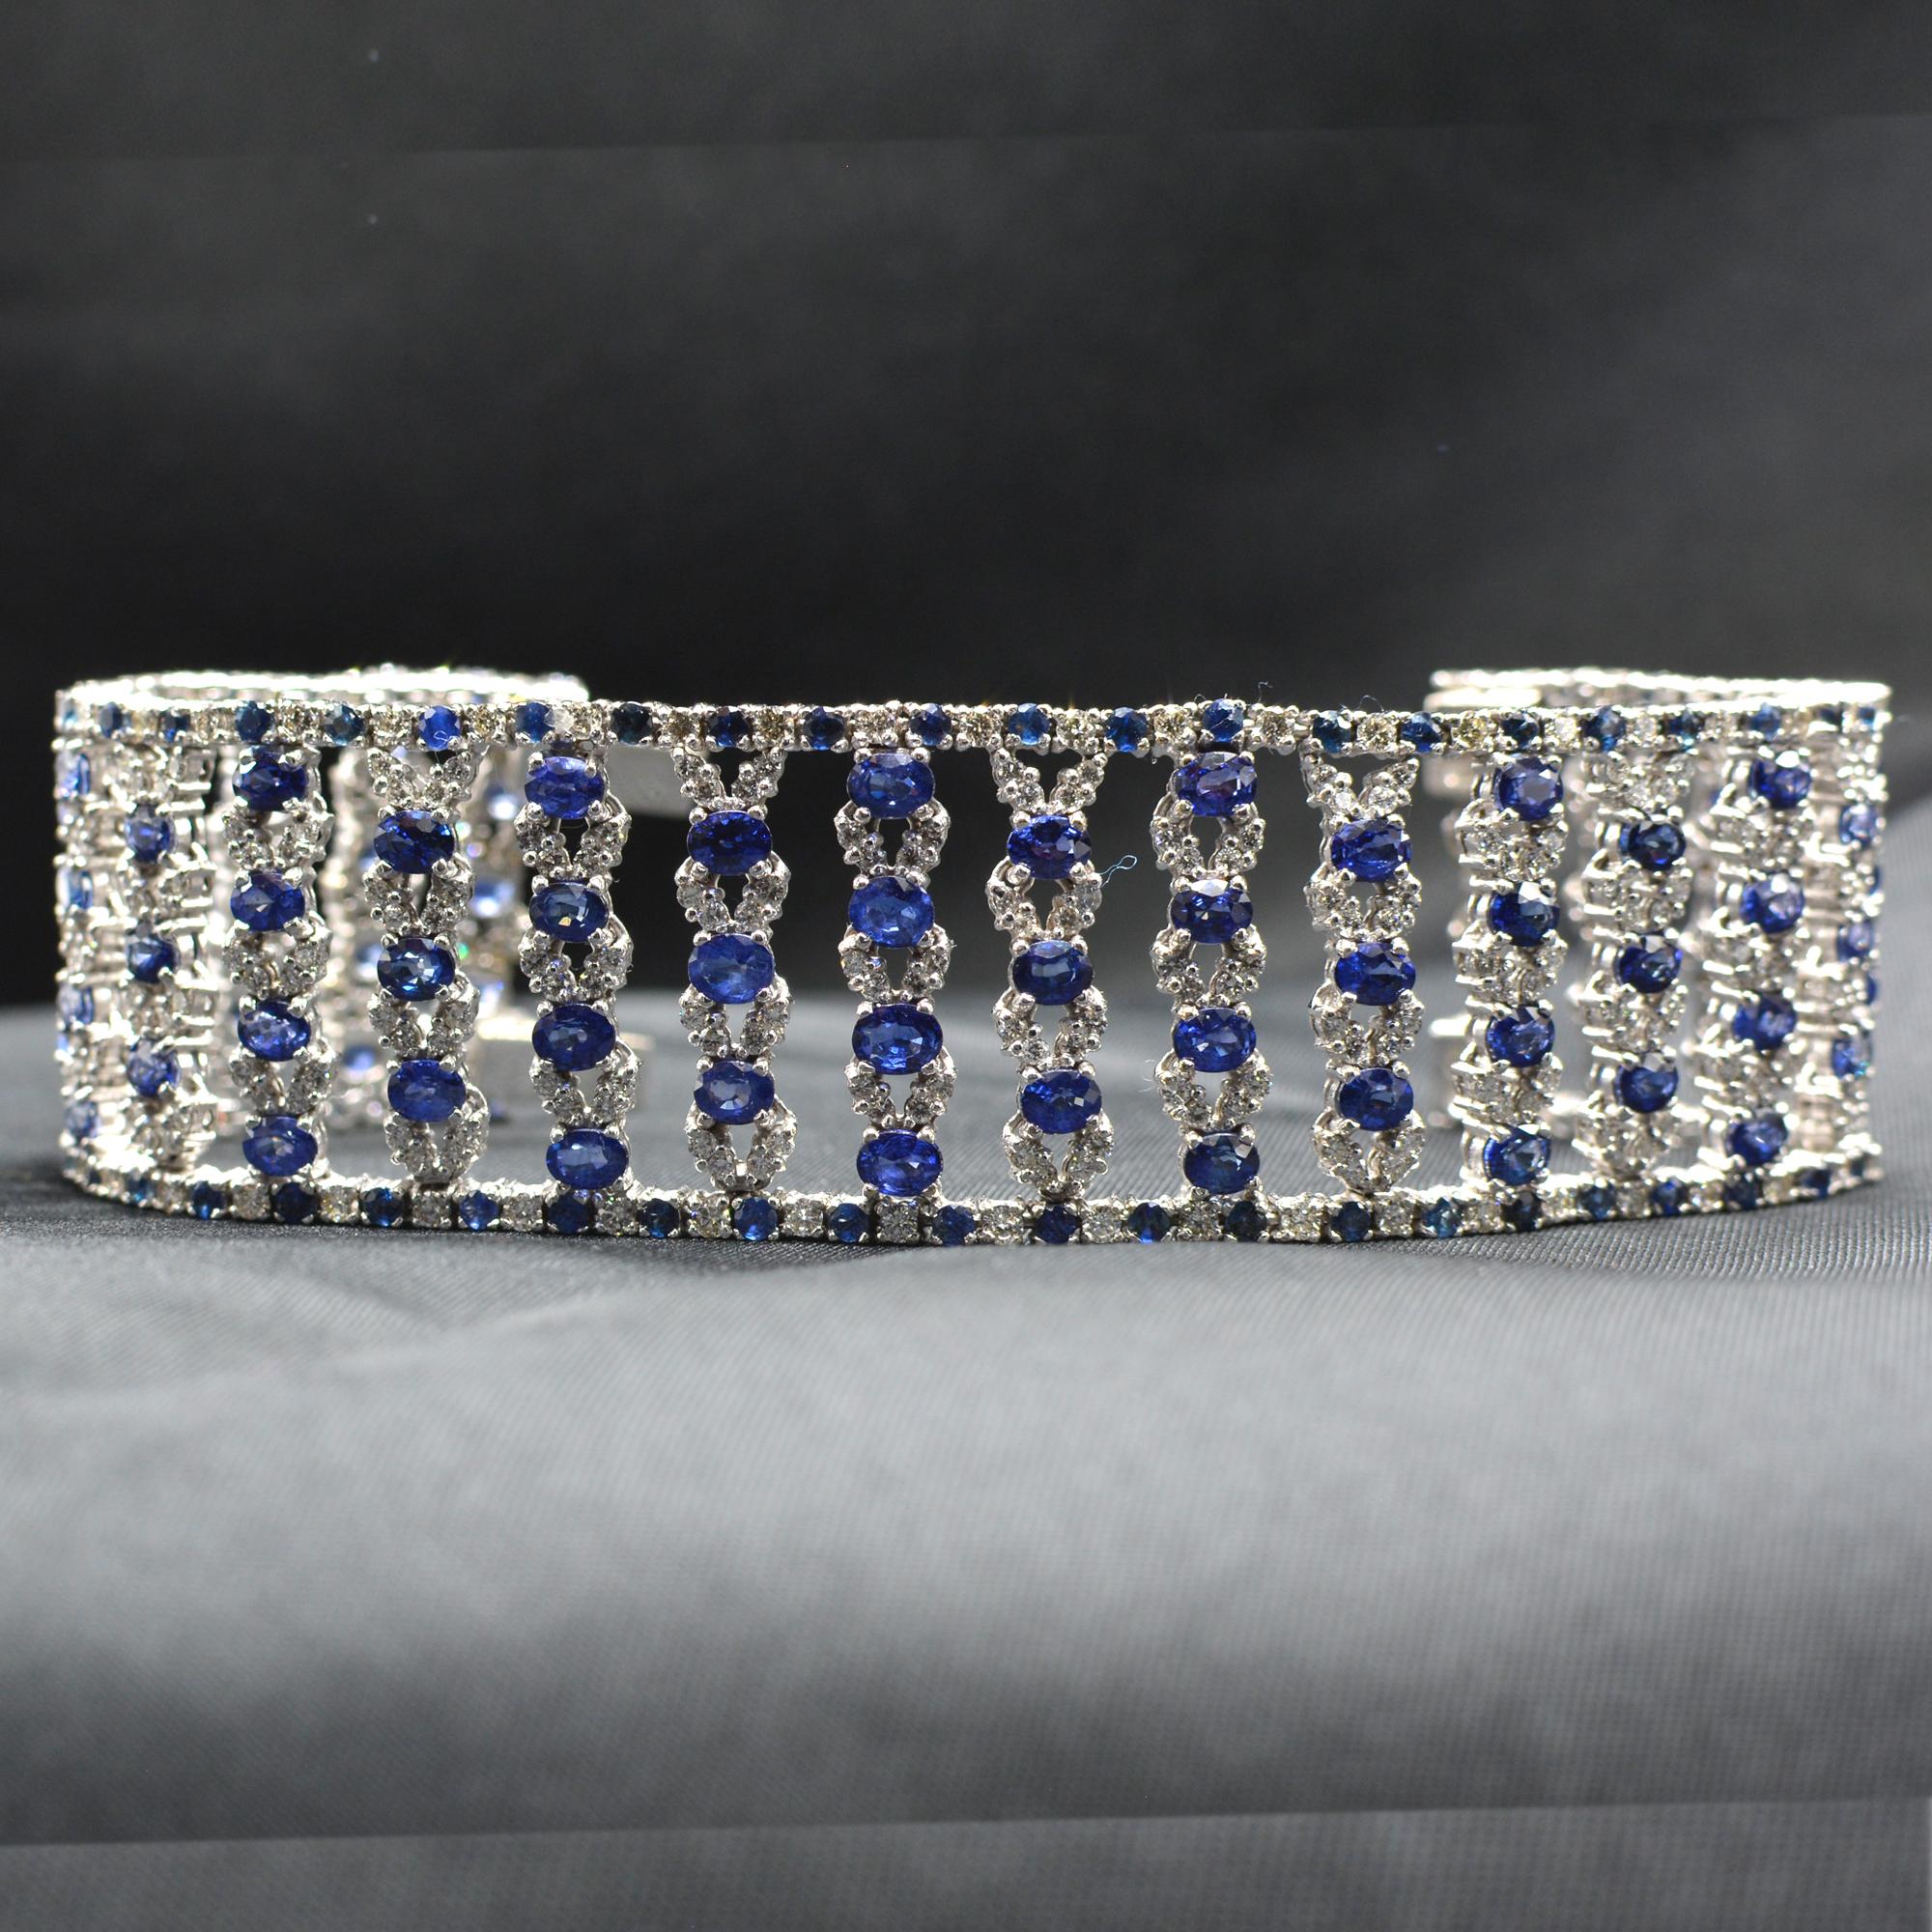 Very wide Blue sapphire and Diamonds Bracelet
oval shape AAA Quality Sapphires Total of 27.50 carat.
(each sapphire is approx 3 x 4 mm)
Diamonds total of 4.0 carat  GH-VS.
14K White Gold 55.0 Grams.
Lenght 7' Inch.
Bracelet width is approx 27 mm
